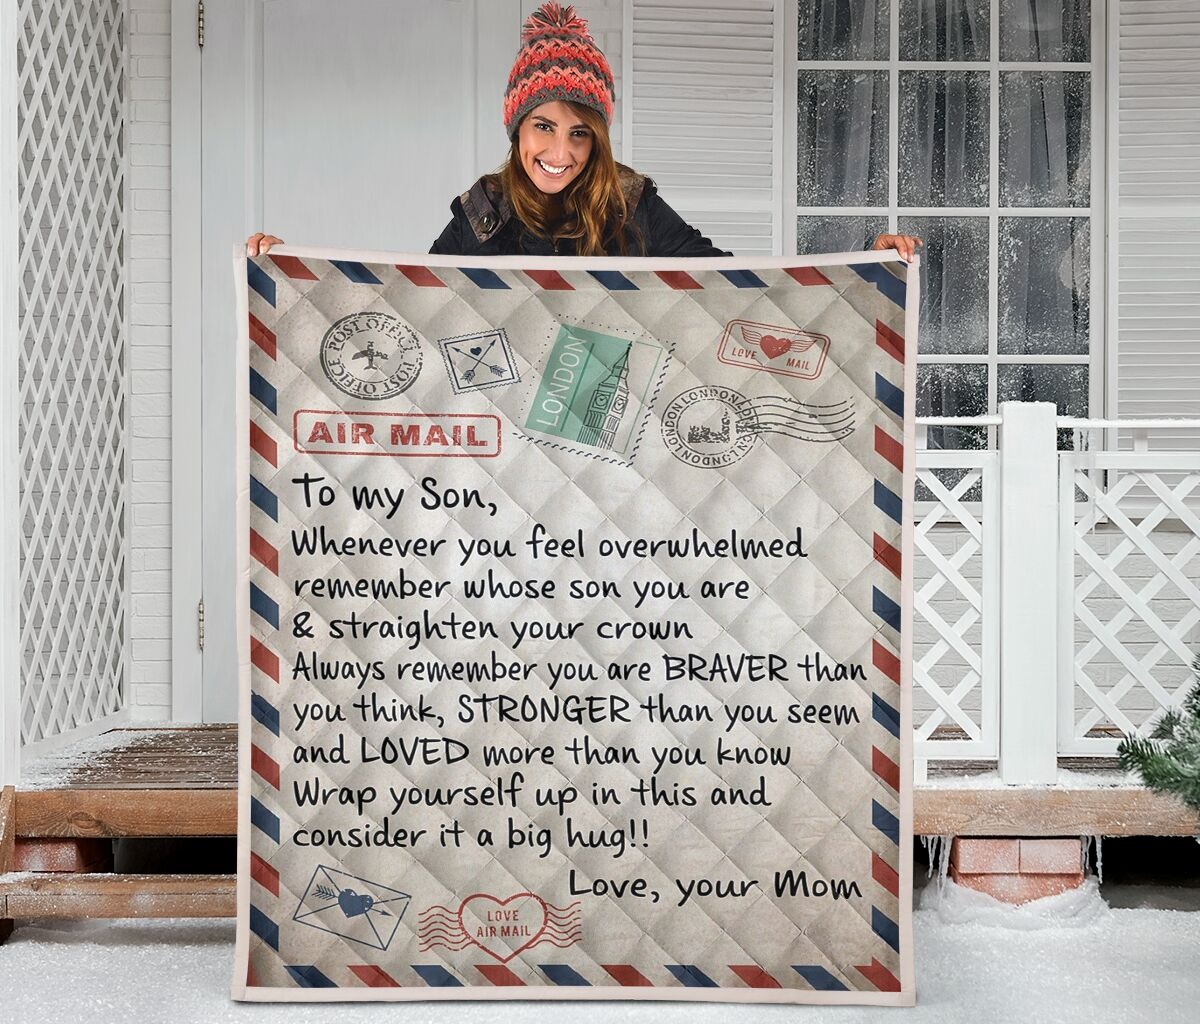 Air mail To my son whenever you feel overwhelmed blanket1